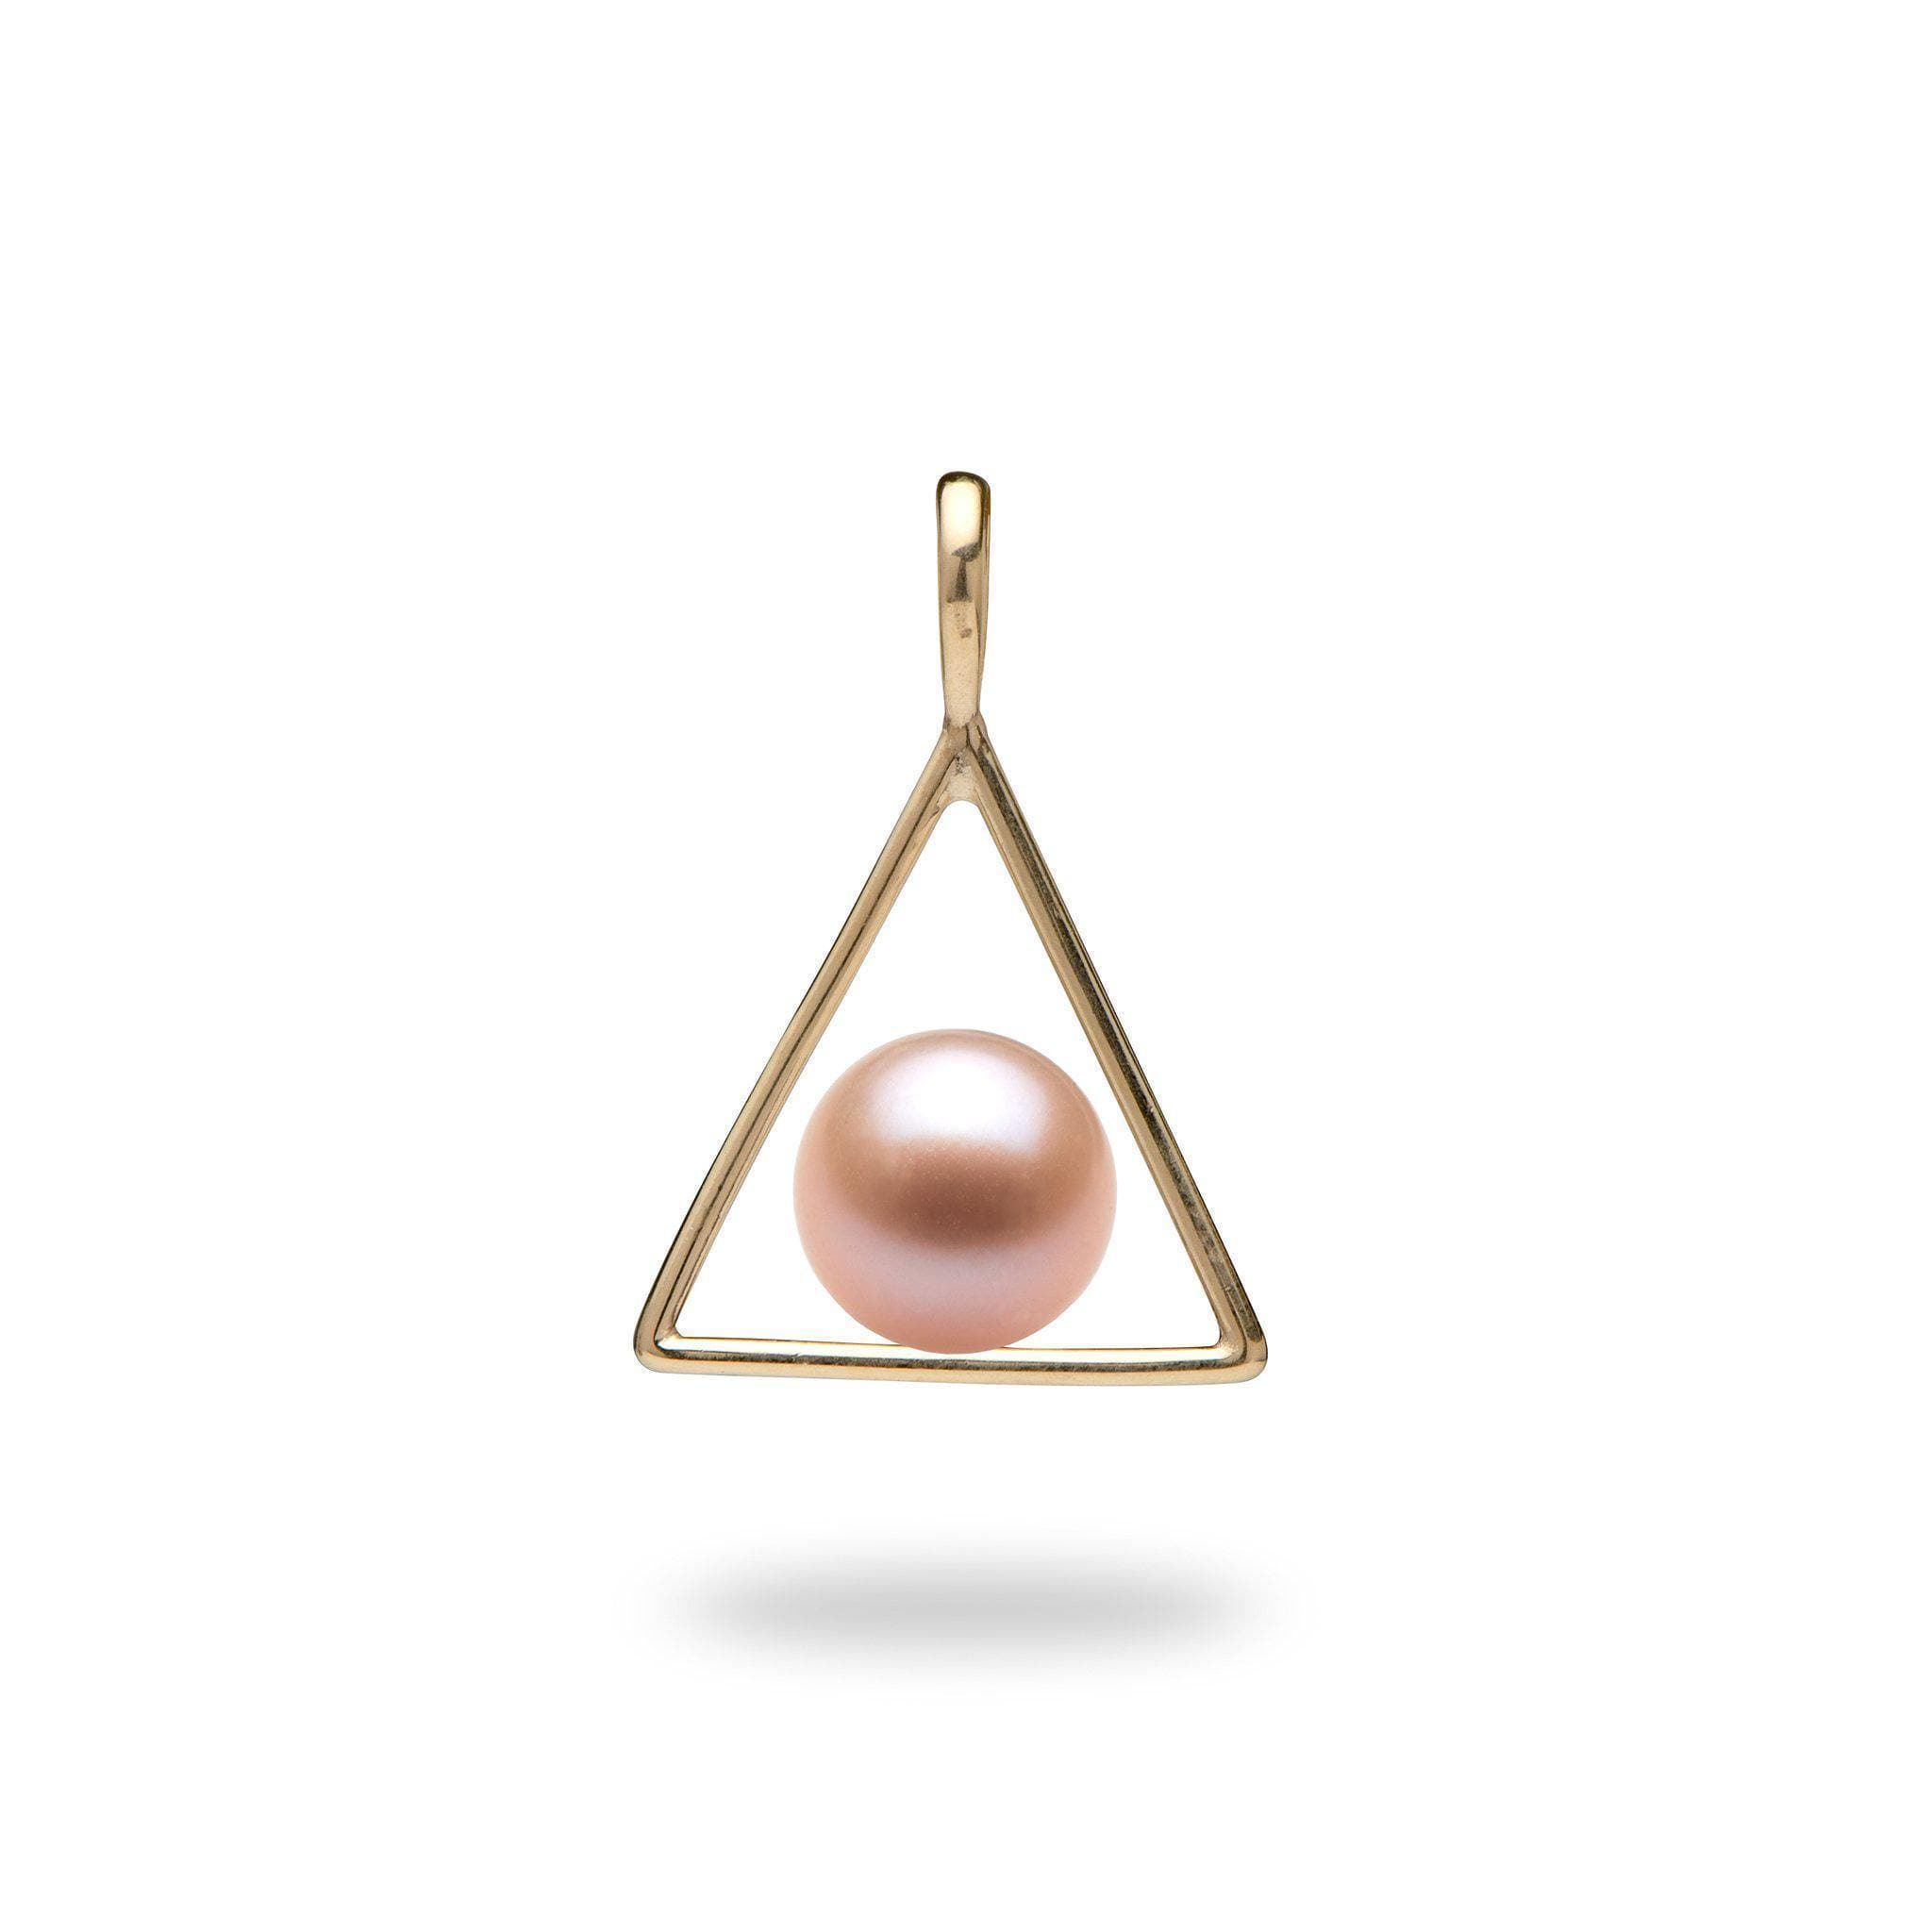 Triangle Pendant Mounting in 10K Yellow Gold with Pink Pearl - Maui Divers Jewelry